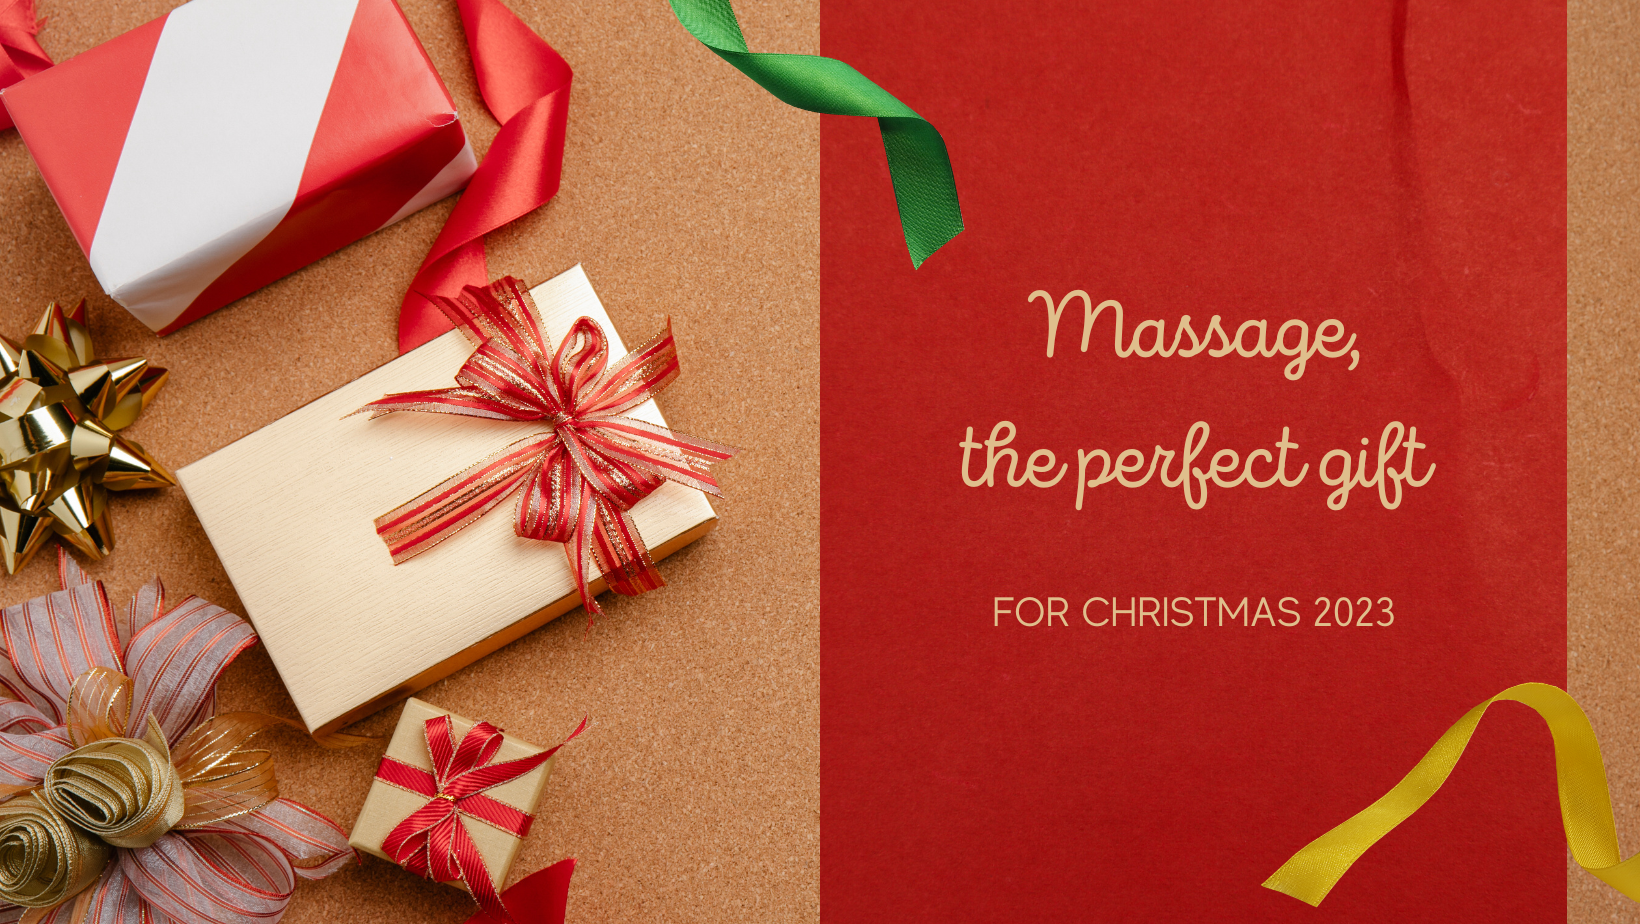 Massage, the Perfect Christmas Gift for 2023